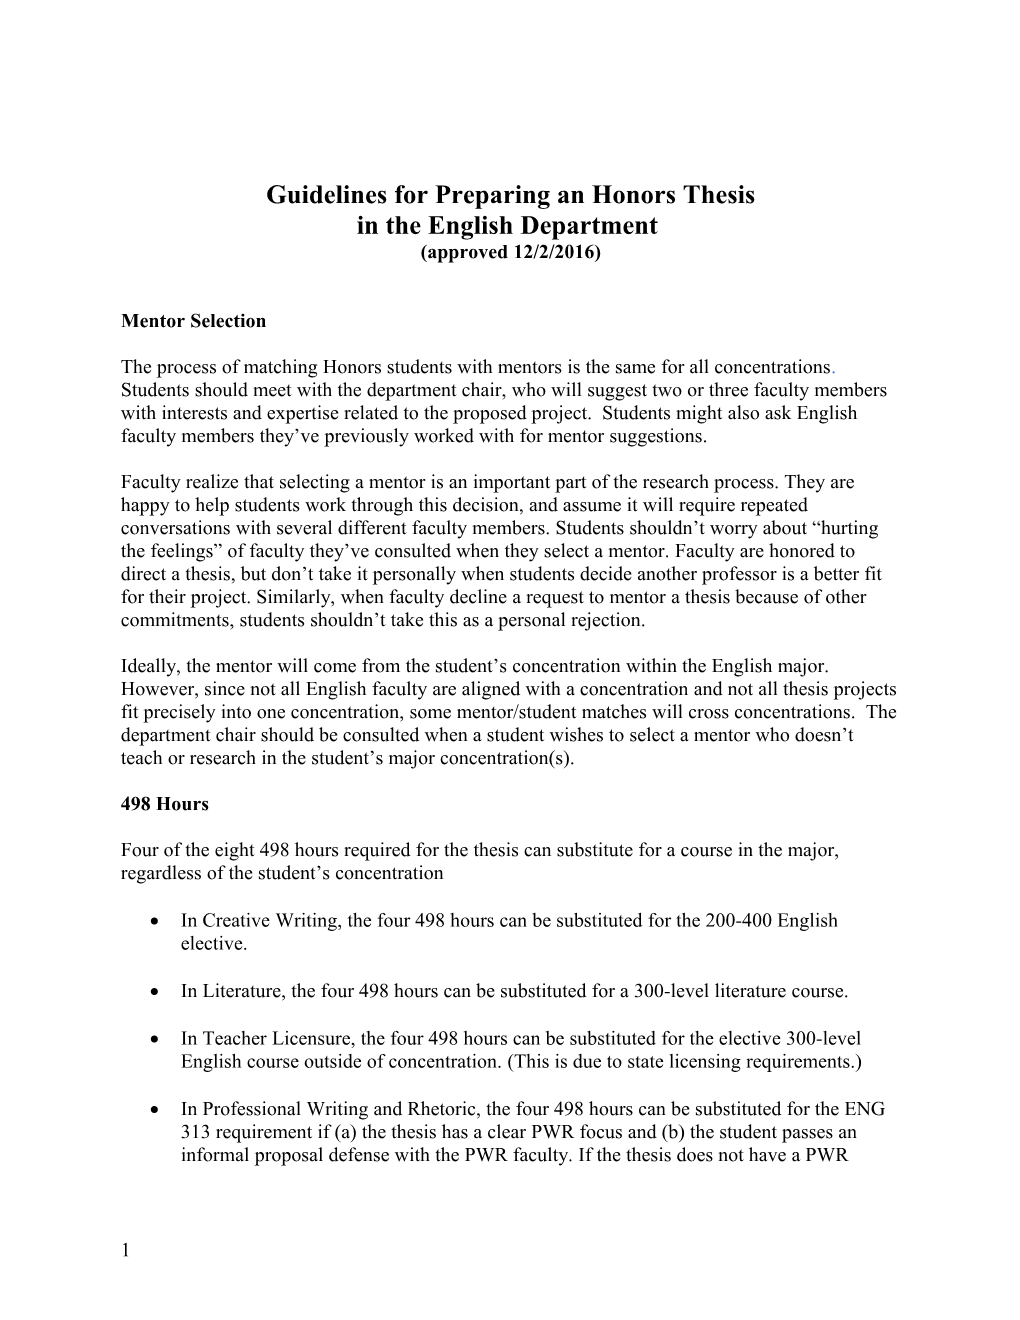 Guidelines for Preparing an Honors Thesis